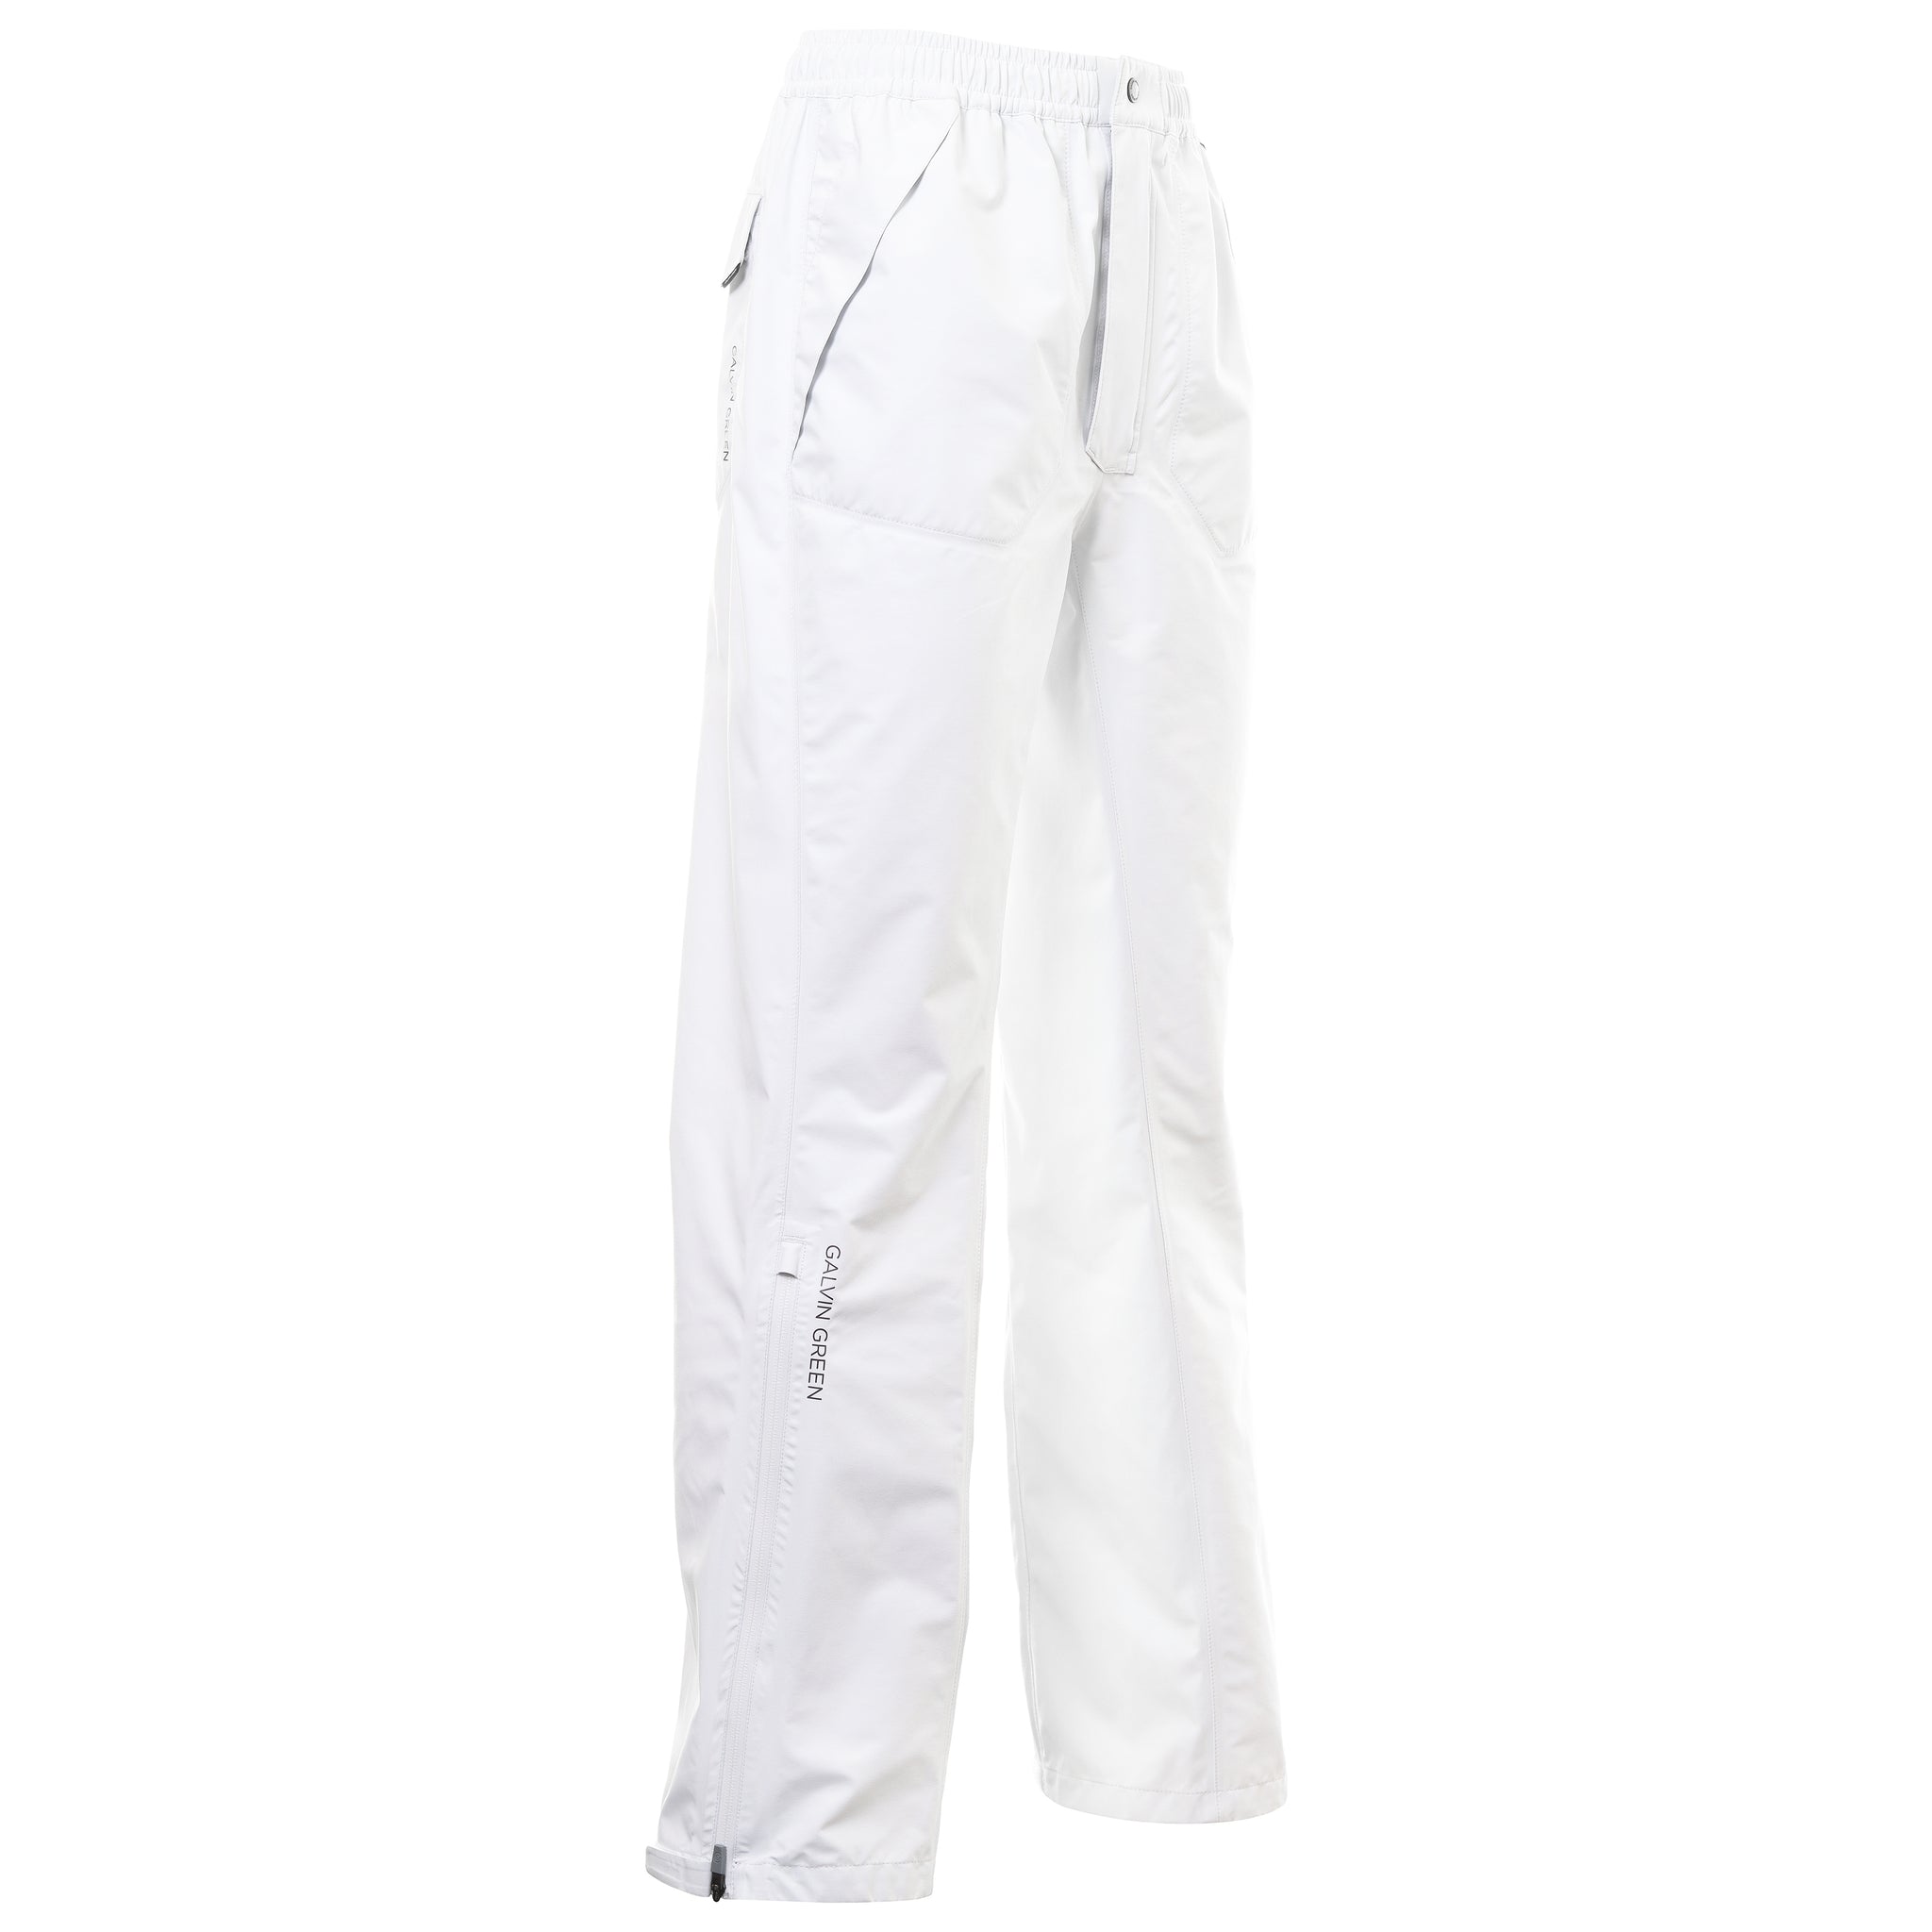 galvin-green-arthur-paclite-stretch-gore-tex-waterproof-trousers-white-9409